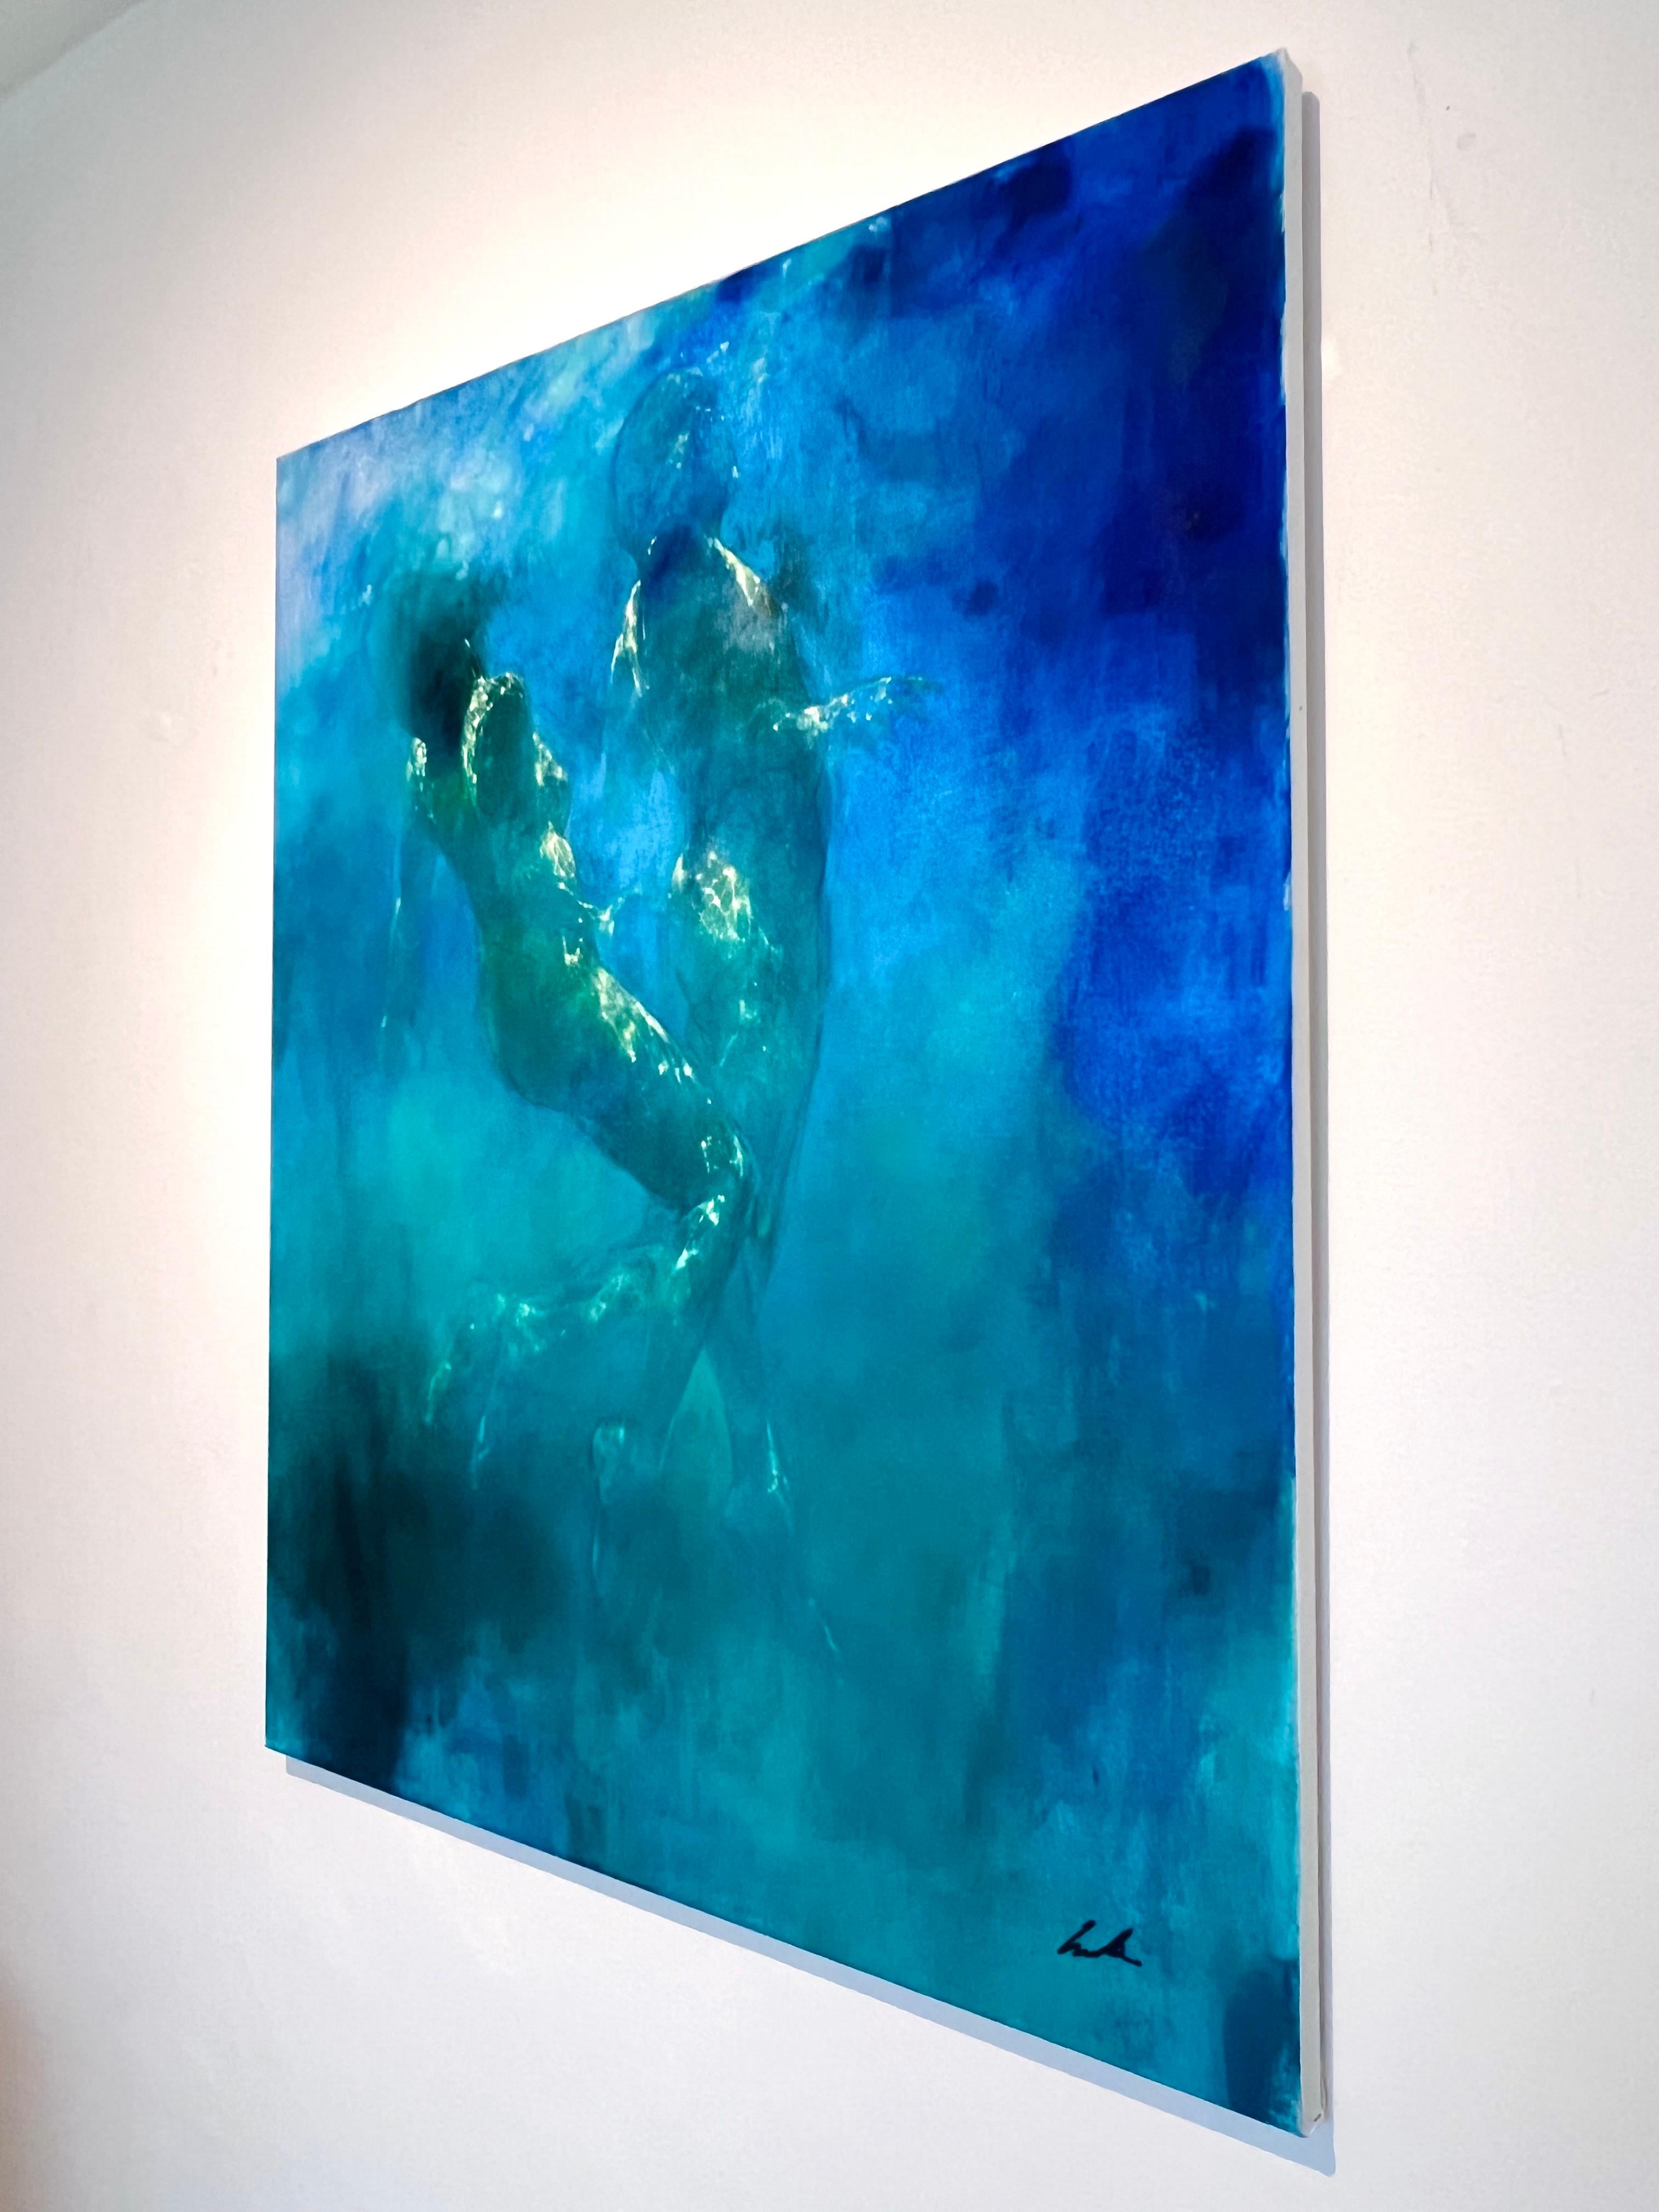  Aqua Serenity - abstract representation of the human form - underwater painting - Abstract Expressionist Painting by Bill Bate